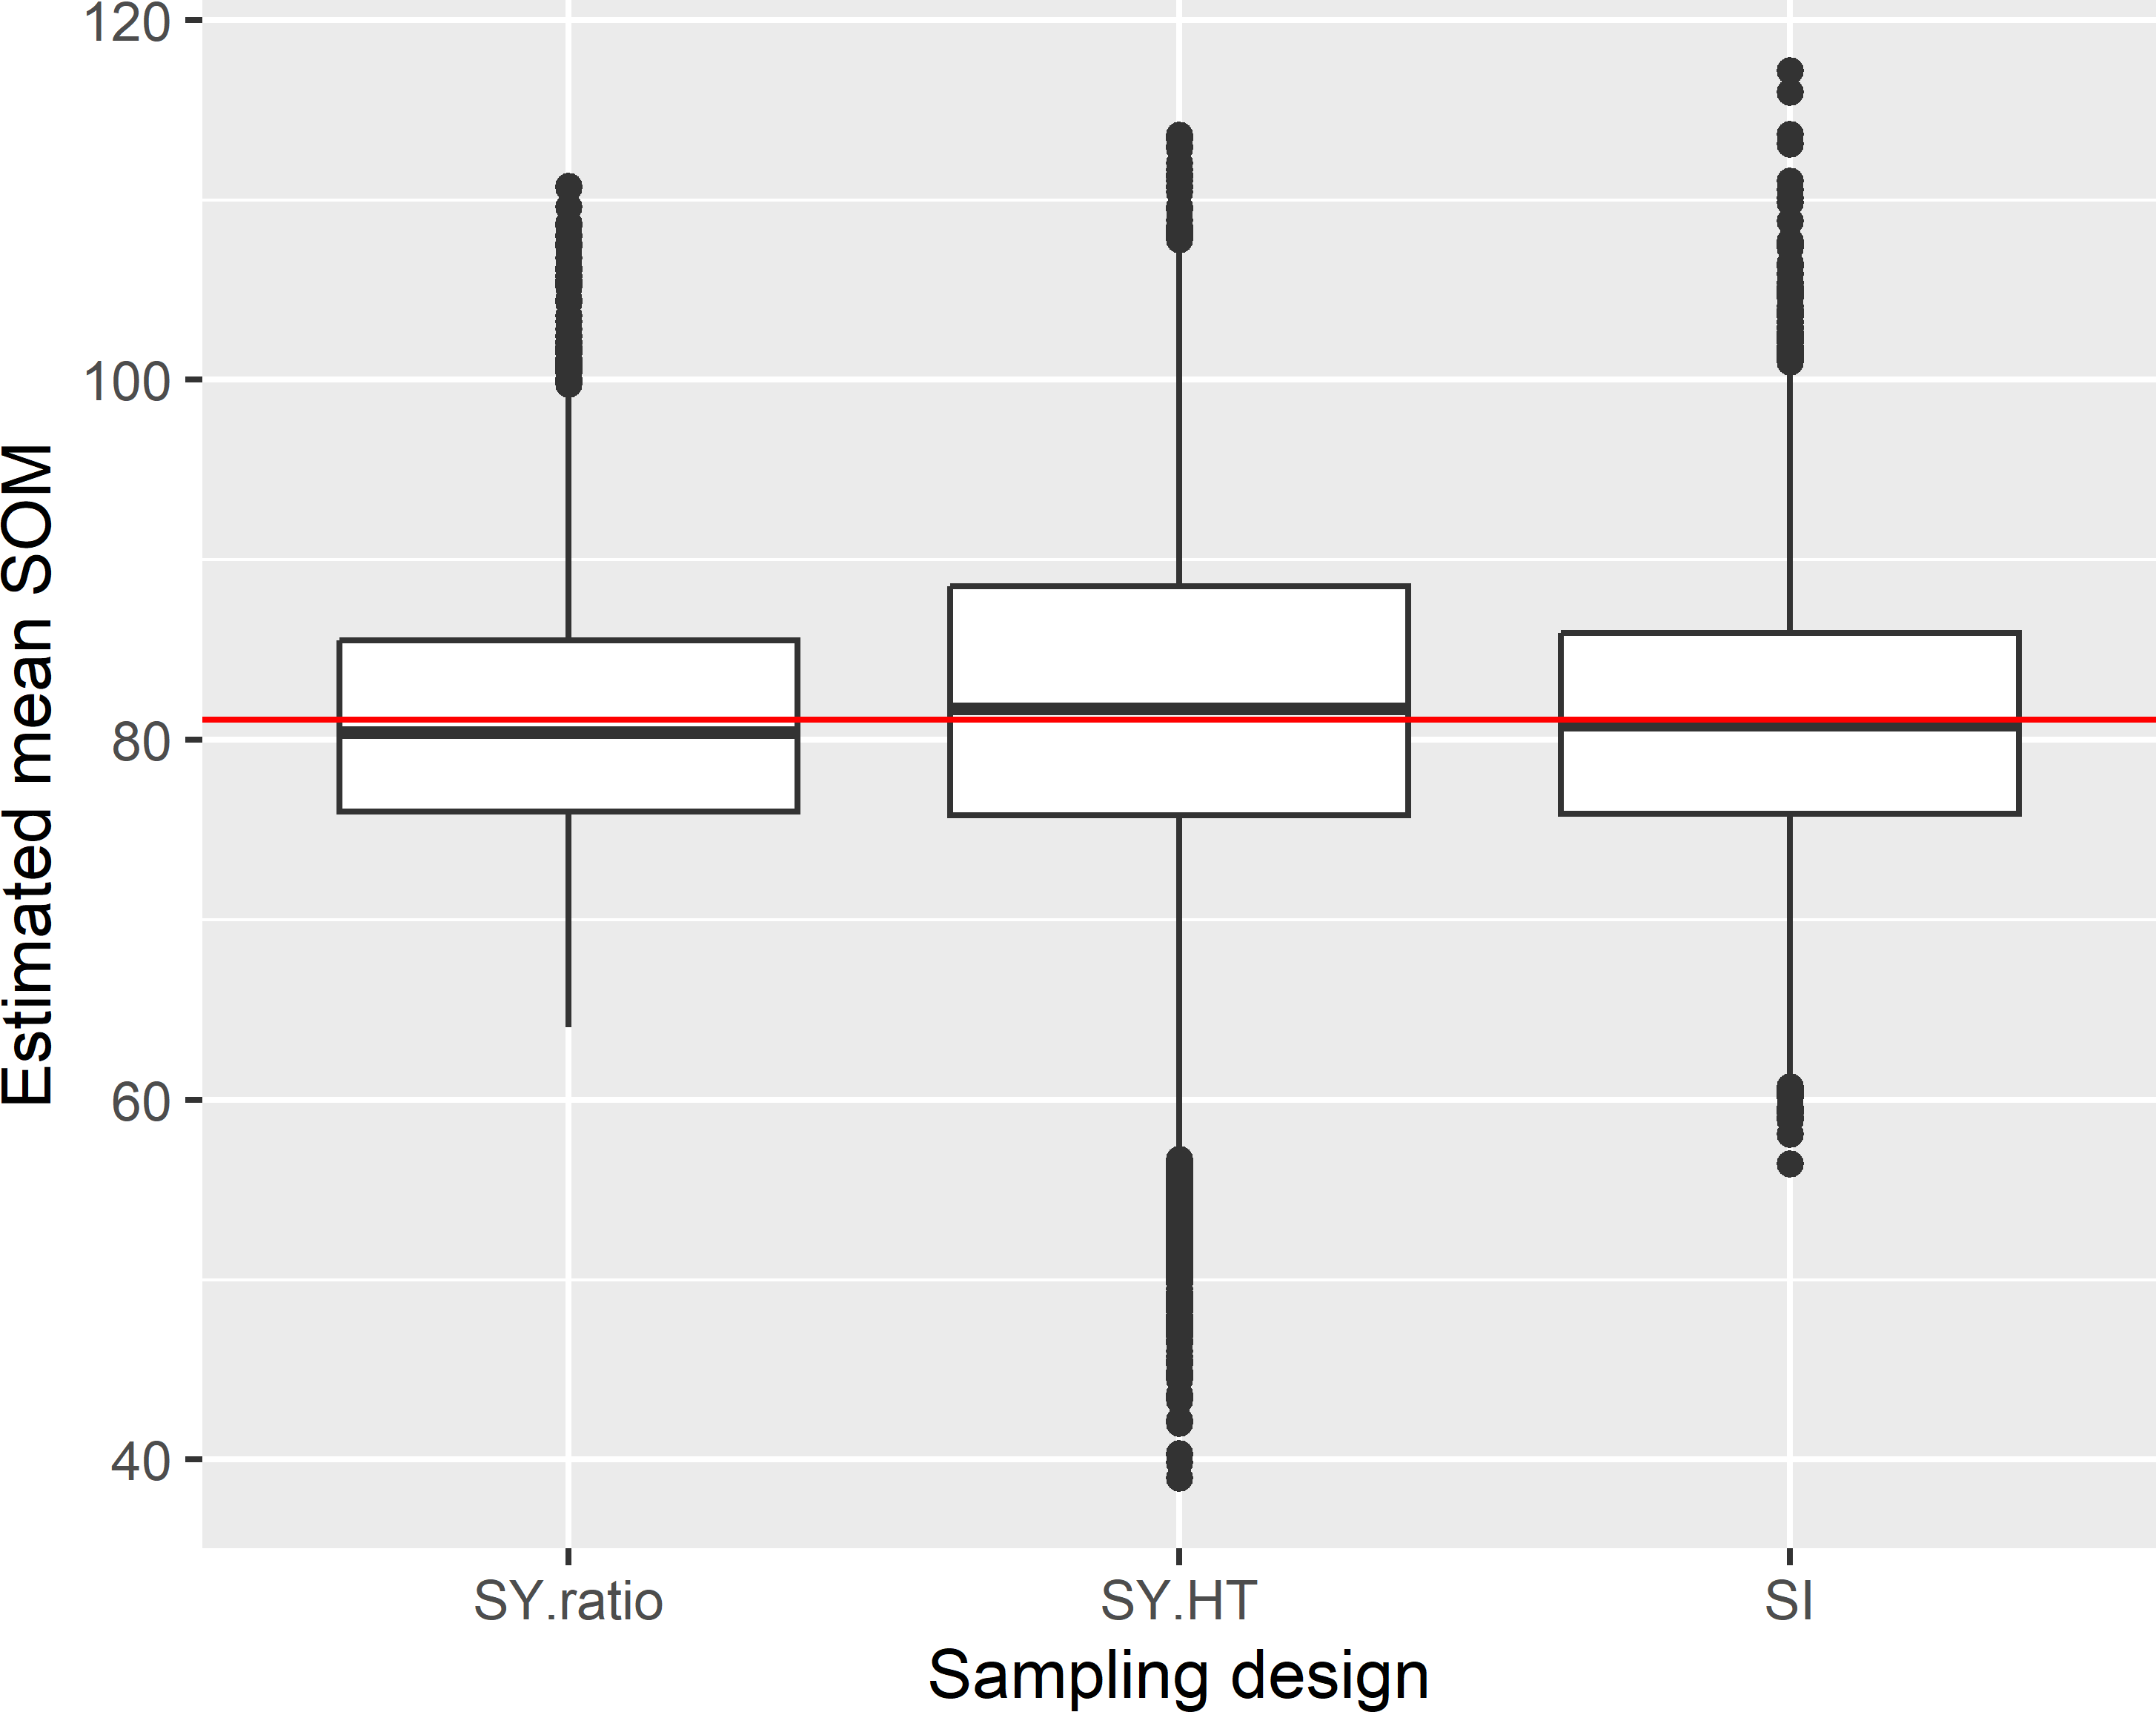 Approximated sampling distribution of estimators of the mean SOM concentration (g kg-1) in Voorst, for systematic random sampling (square grid) and simple random sampling and an expected sample size of 40. With systematic random sampling, both the \(\pi\) estimator (SY.HT) and the ratio estimator (SY.ratio) are used in estimation.